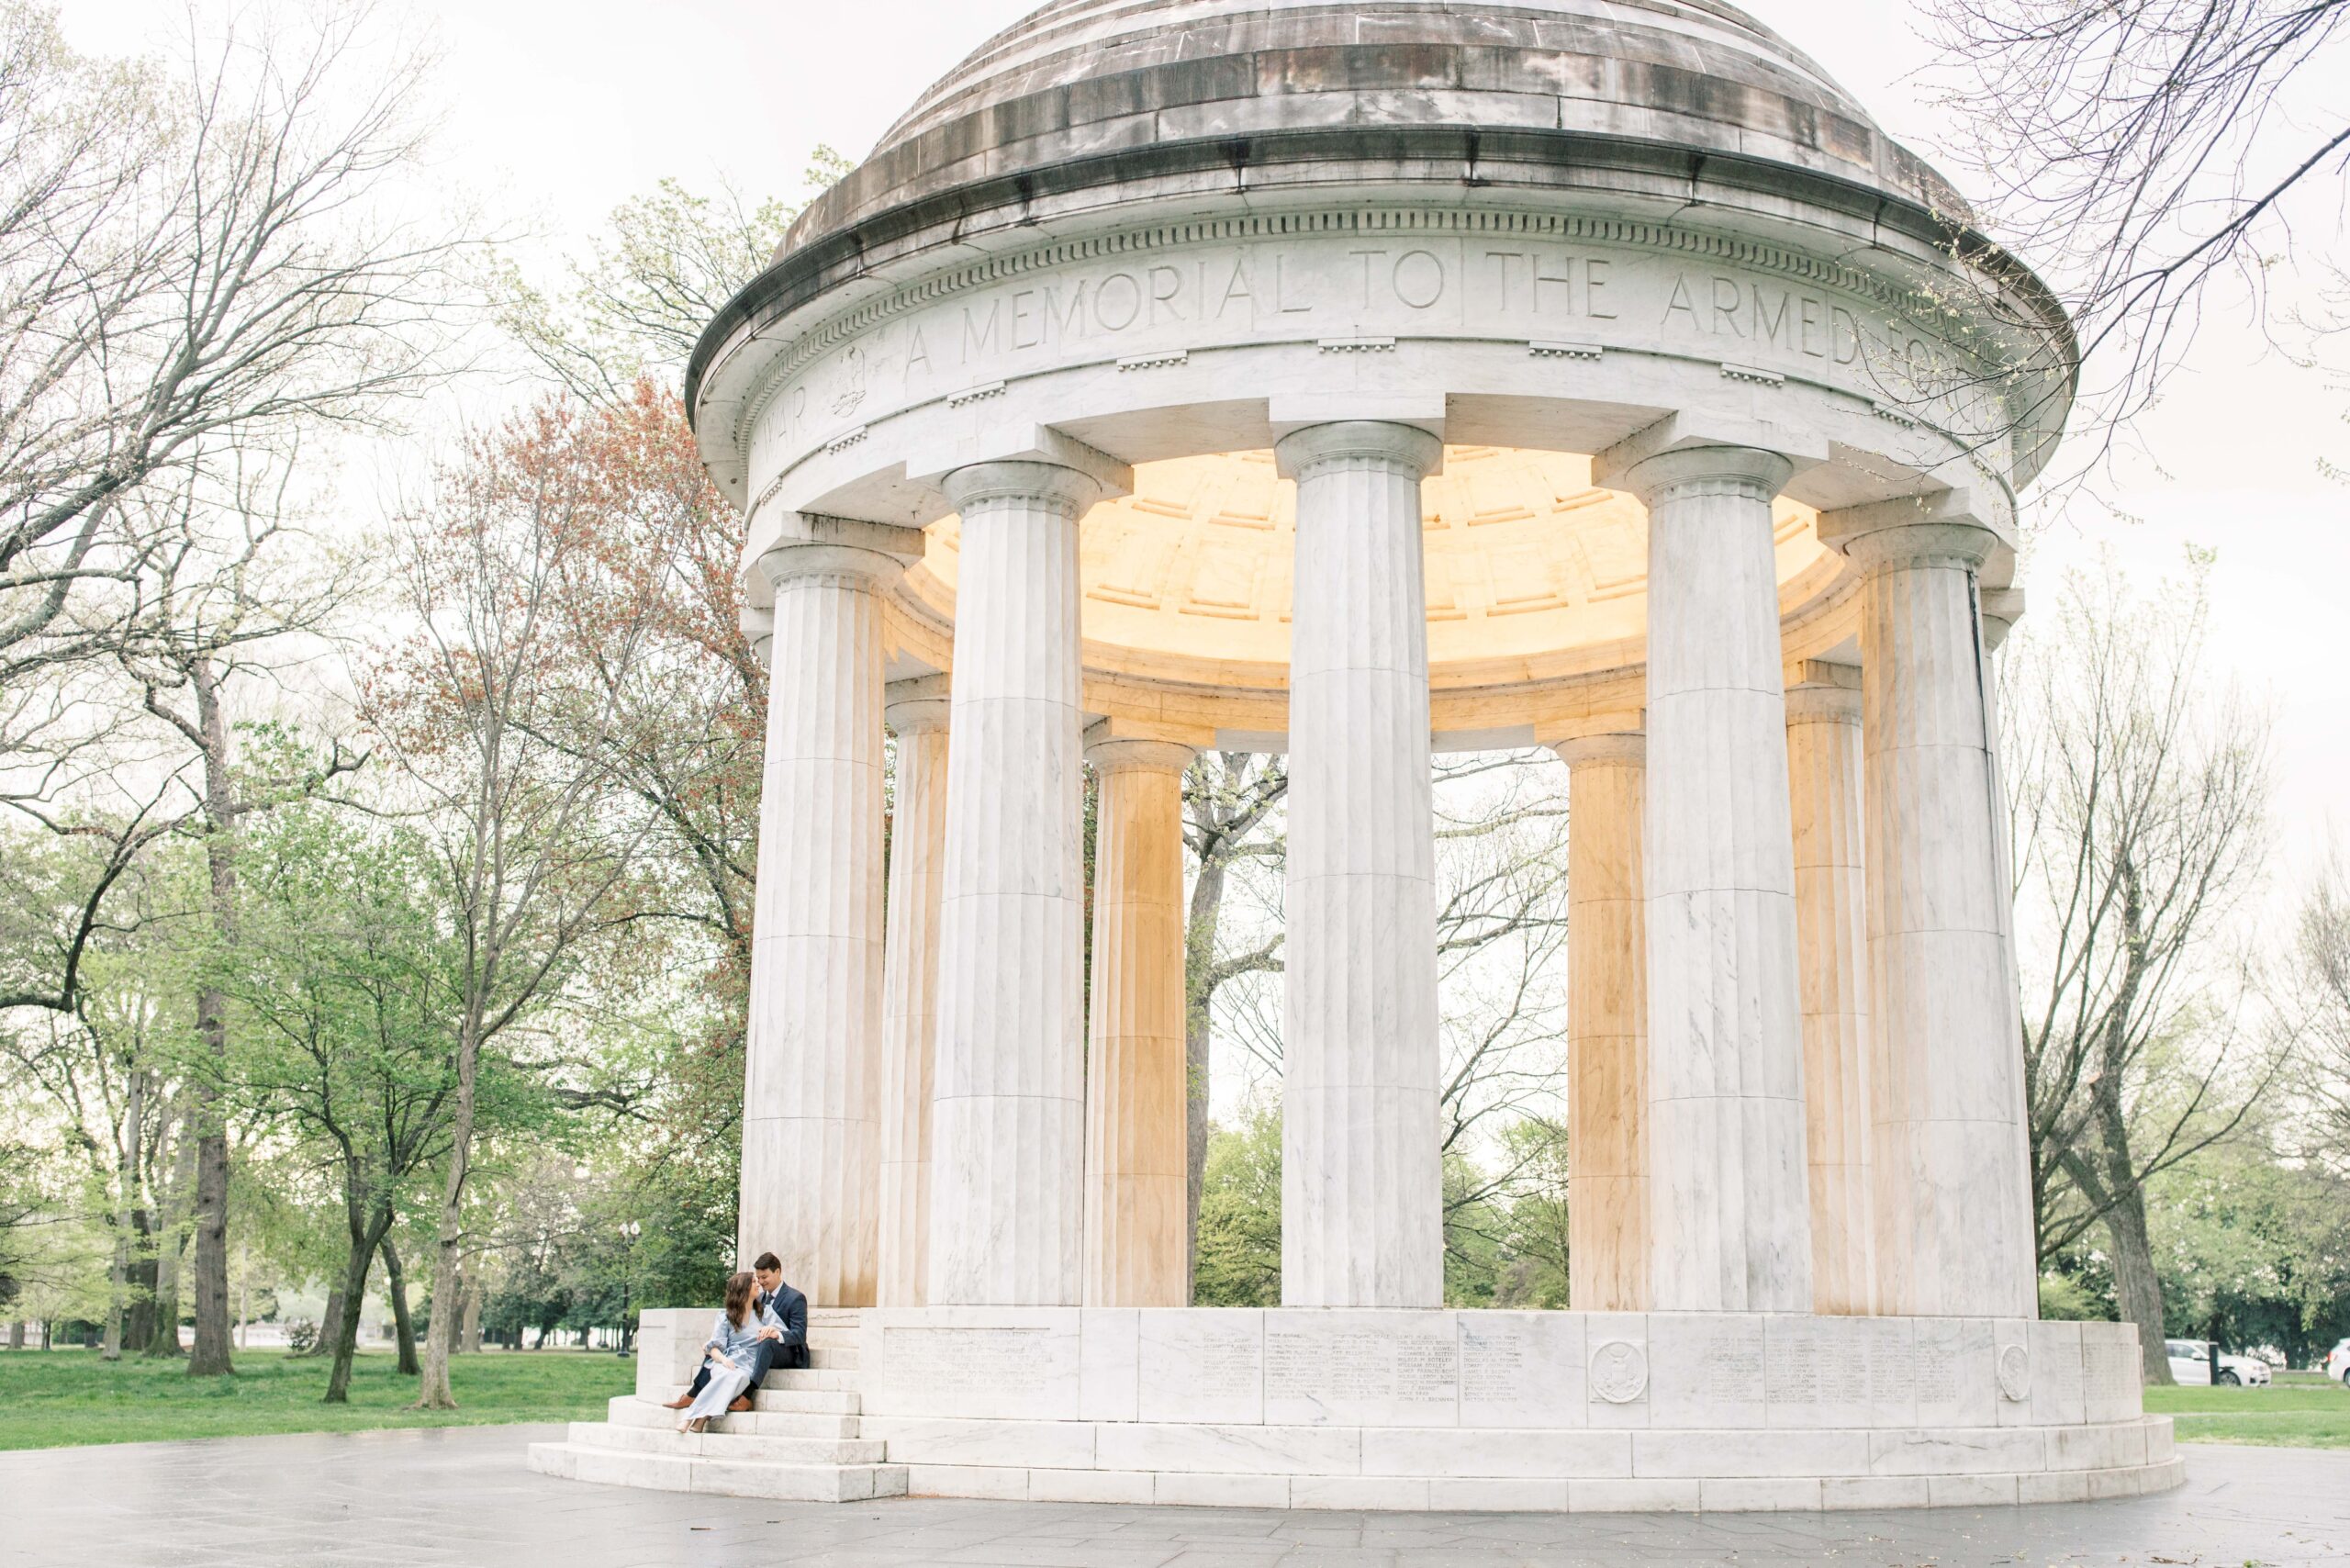 A romantic overcast engagement session at the Reflecting Pool & DC War Memorial on the National Mall in Washington, DC.